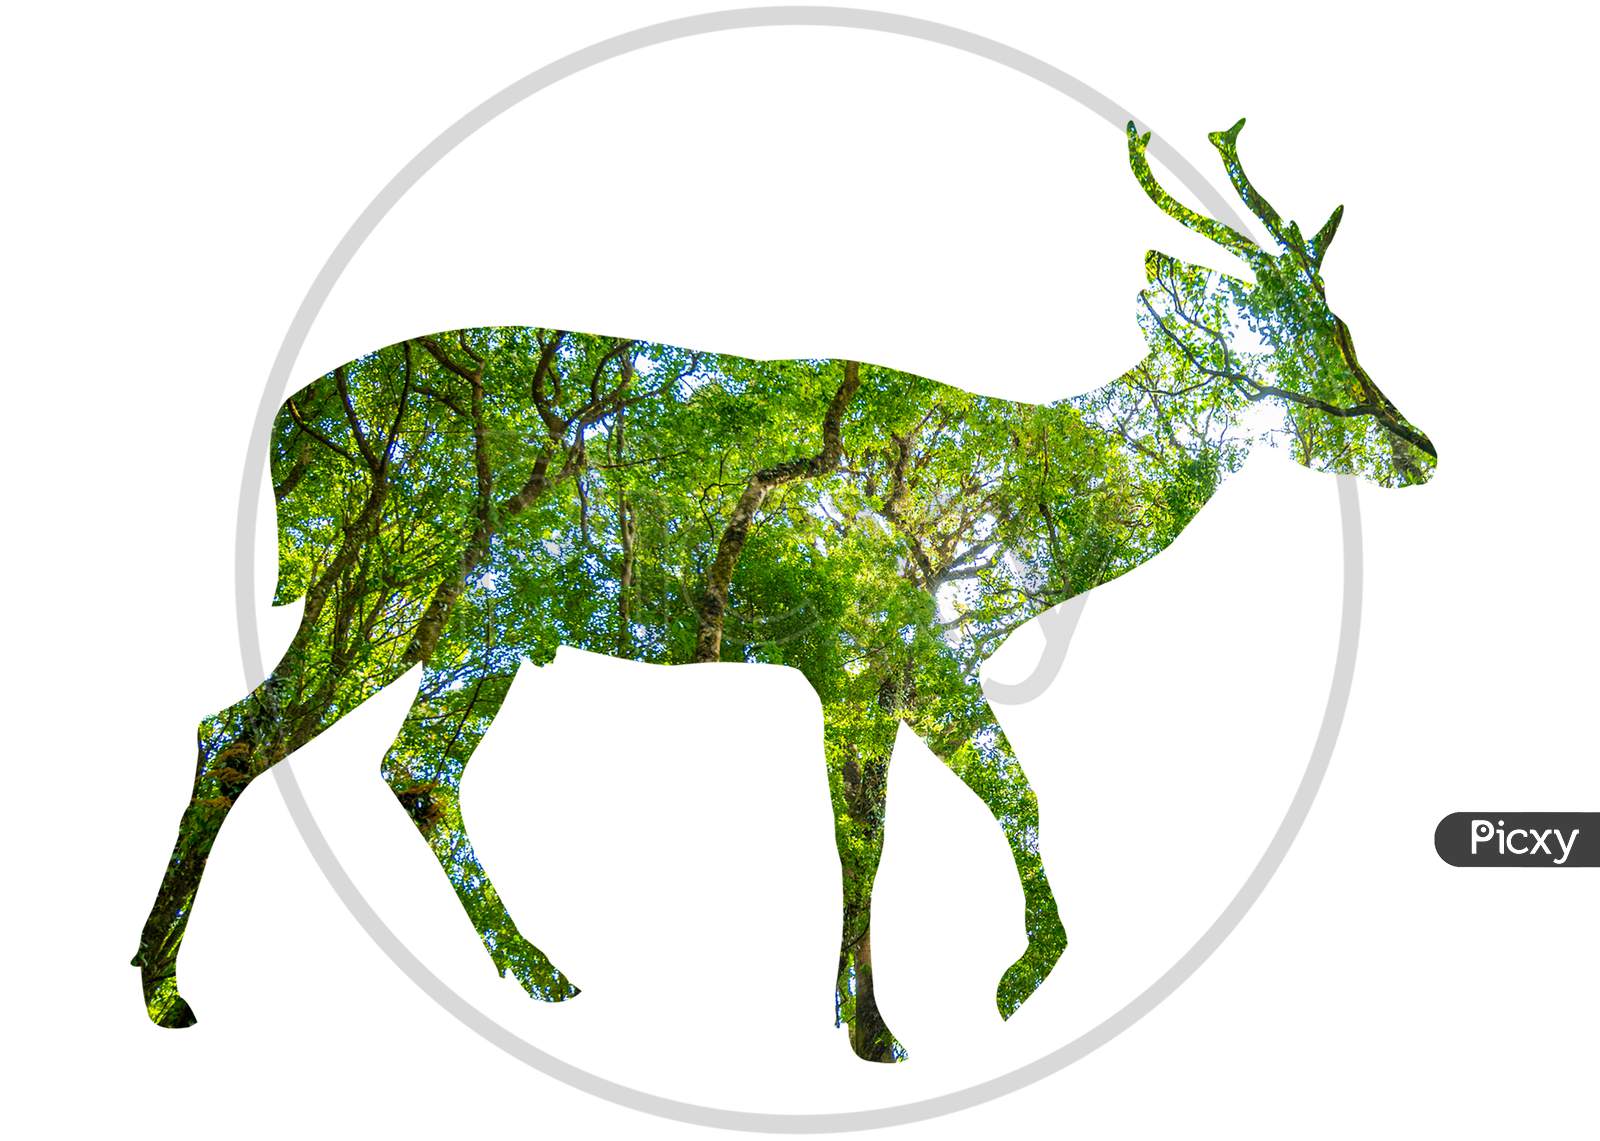 World Wildlife Day Forest Silhouette In The Shape Of A Wild Animal Wildlife And Forest Conservation Concept